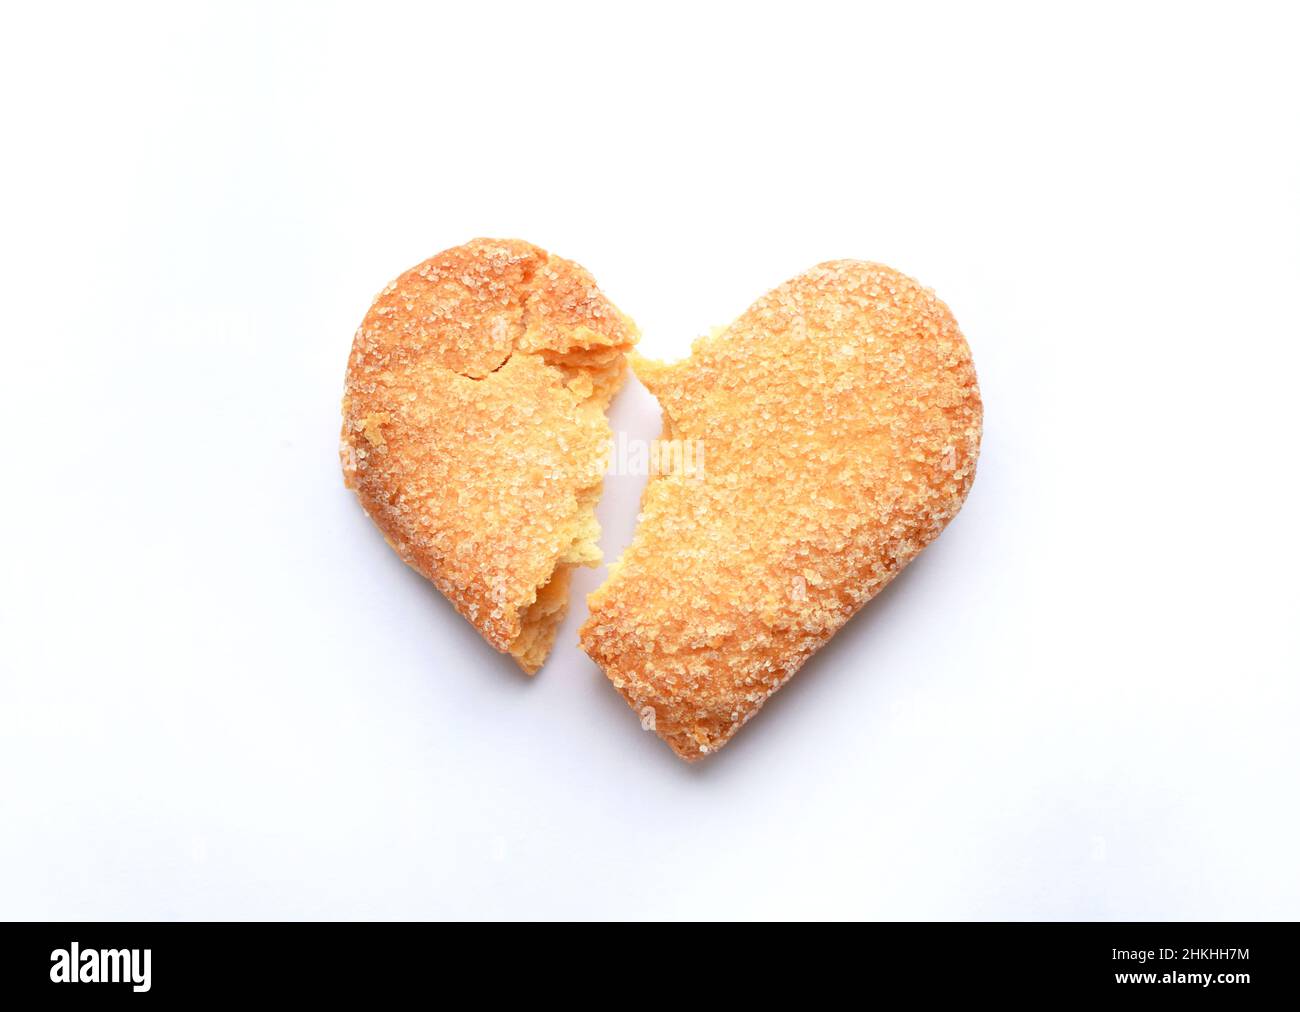 Broken heart-shaped sweet cookies on a white background. Heartbreak and unhappy love concept Stock Photo